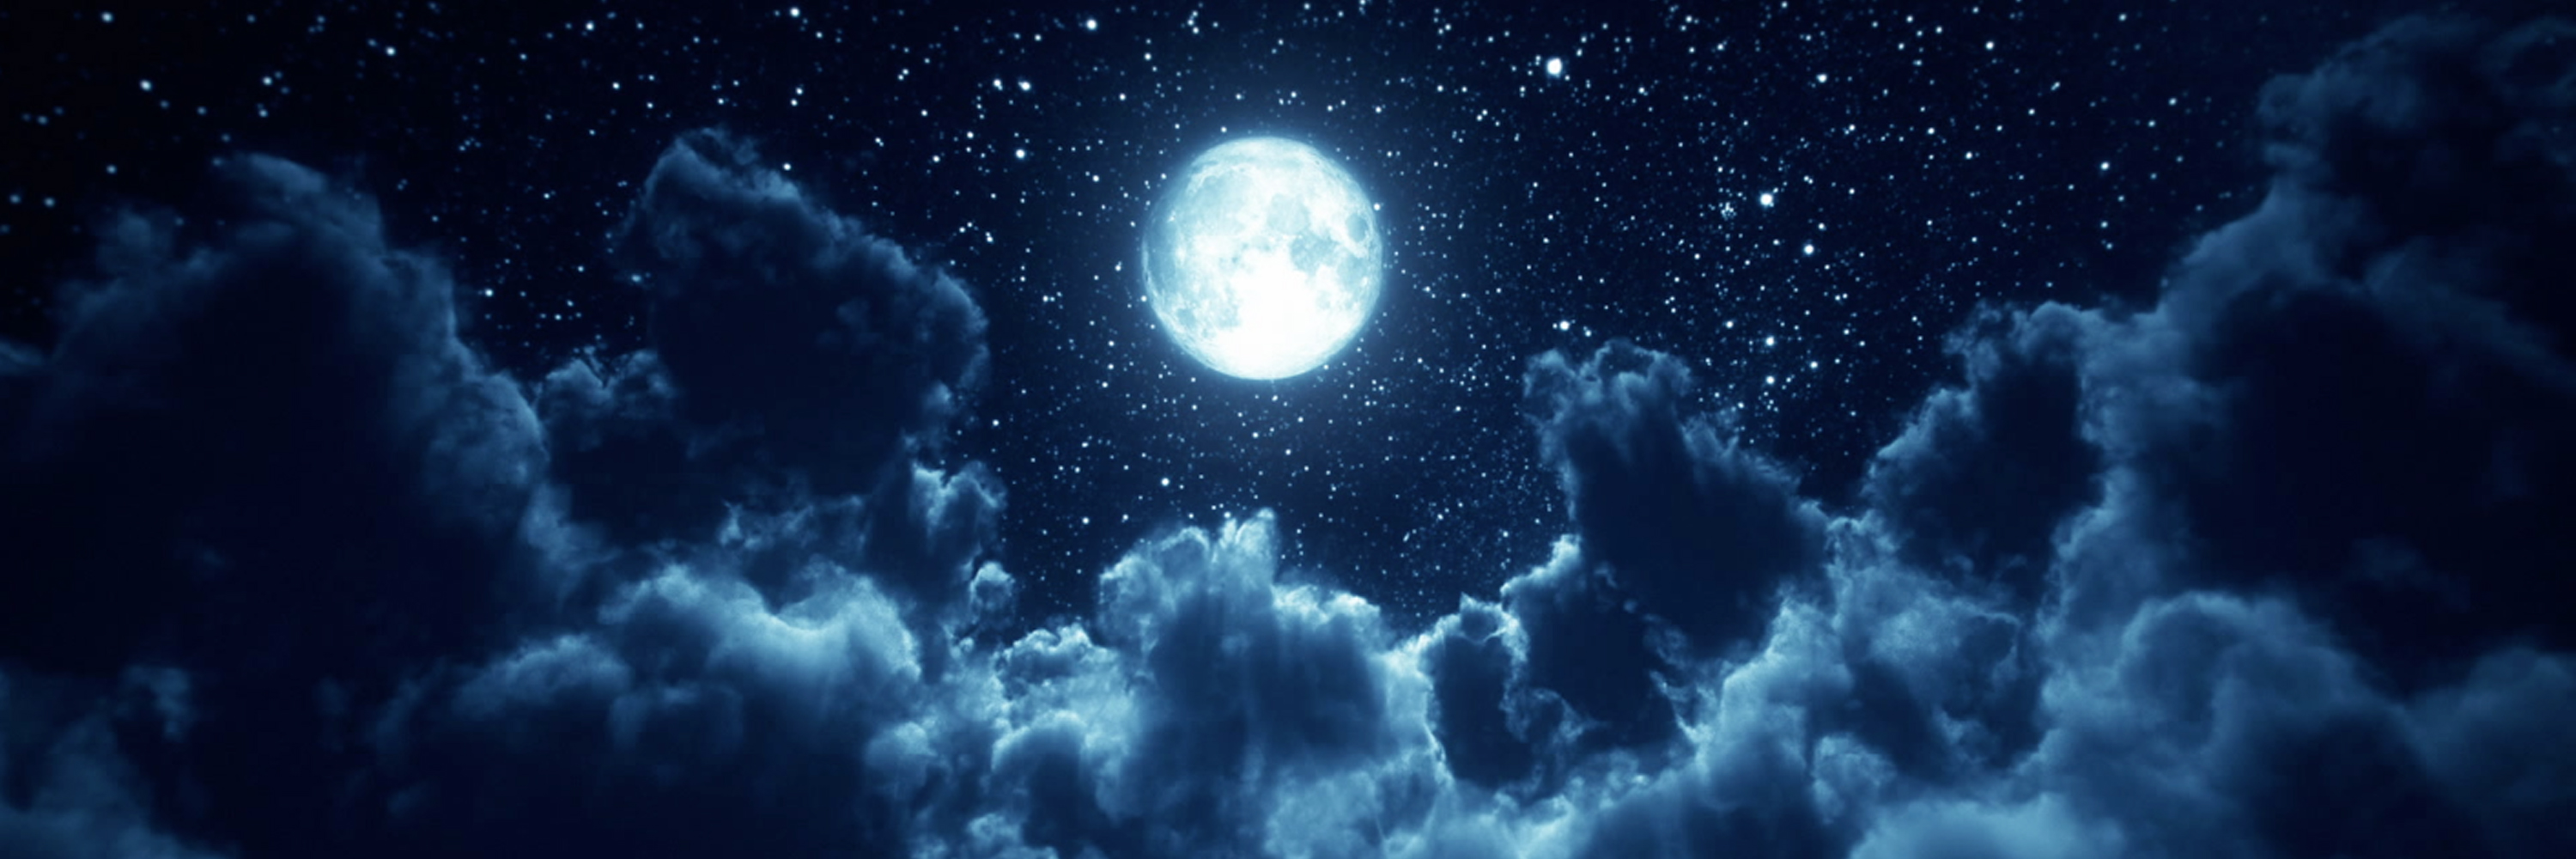 A glowing moon rises over a floor of clouds, surrounded by stars.